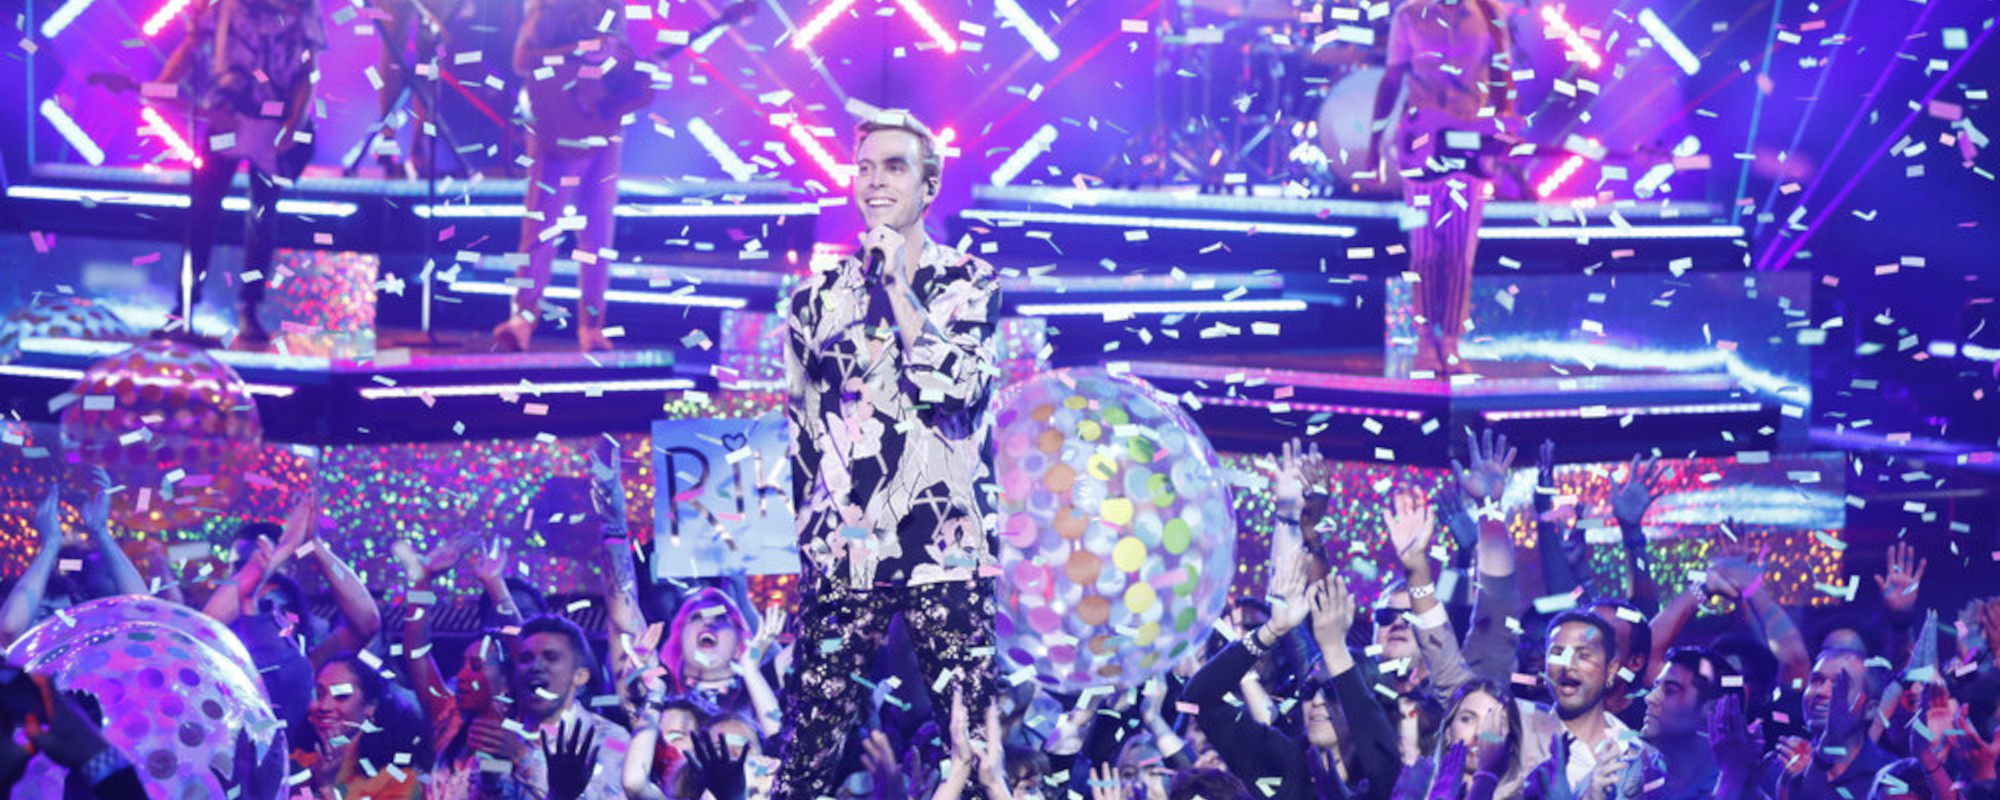 Riker Lynch Can “Feel the Love” After His ‘American Song Contest’ Performance